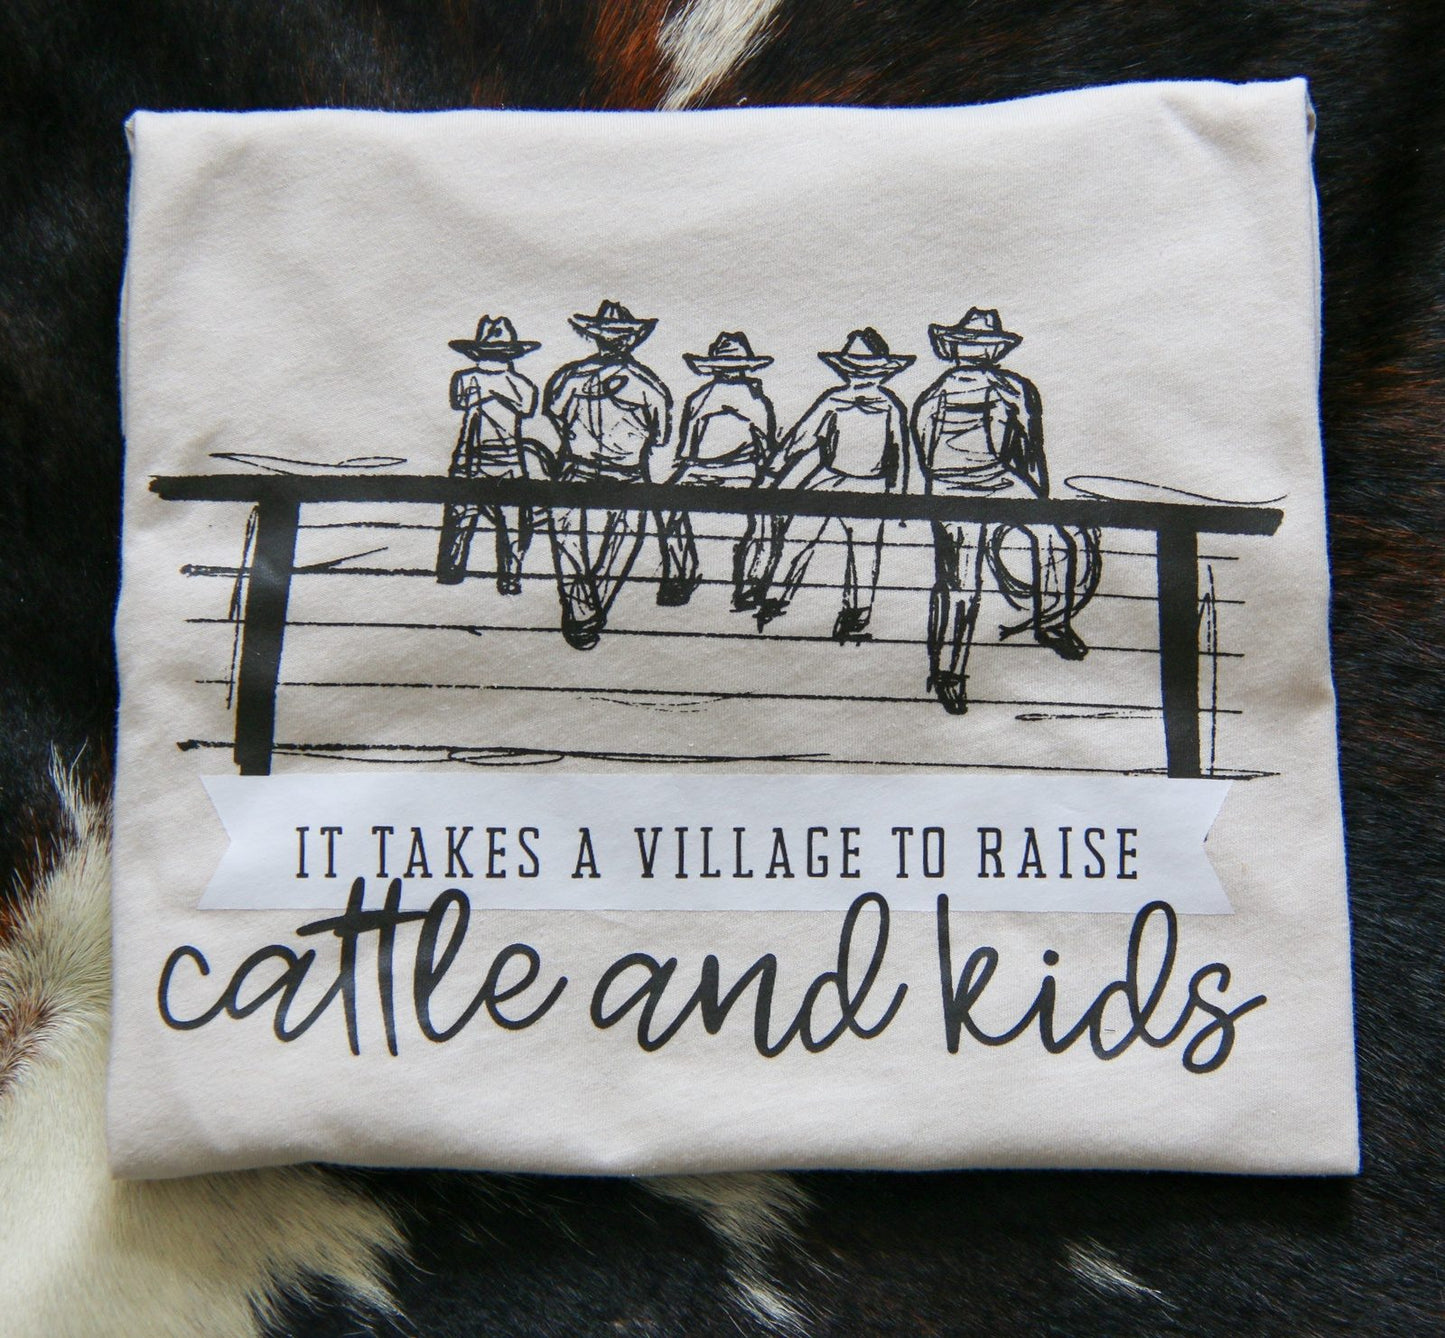 It Takes a Village to Raise Cattle and Kids